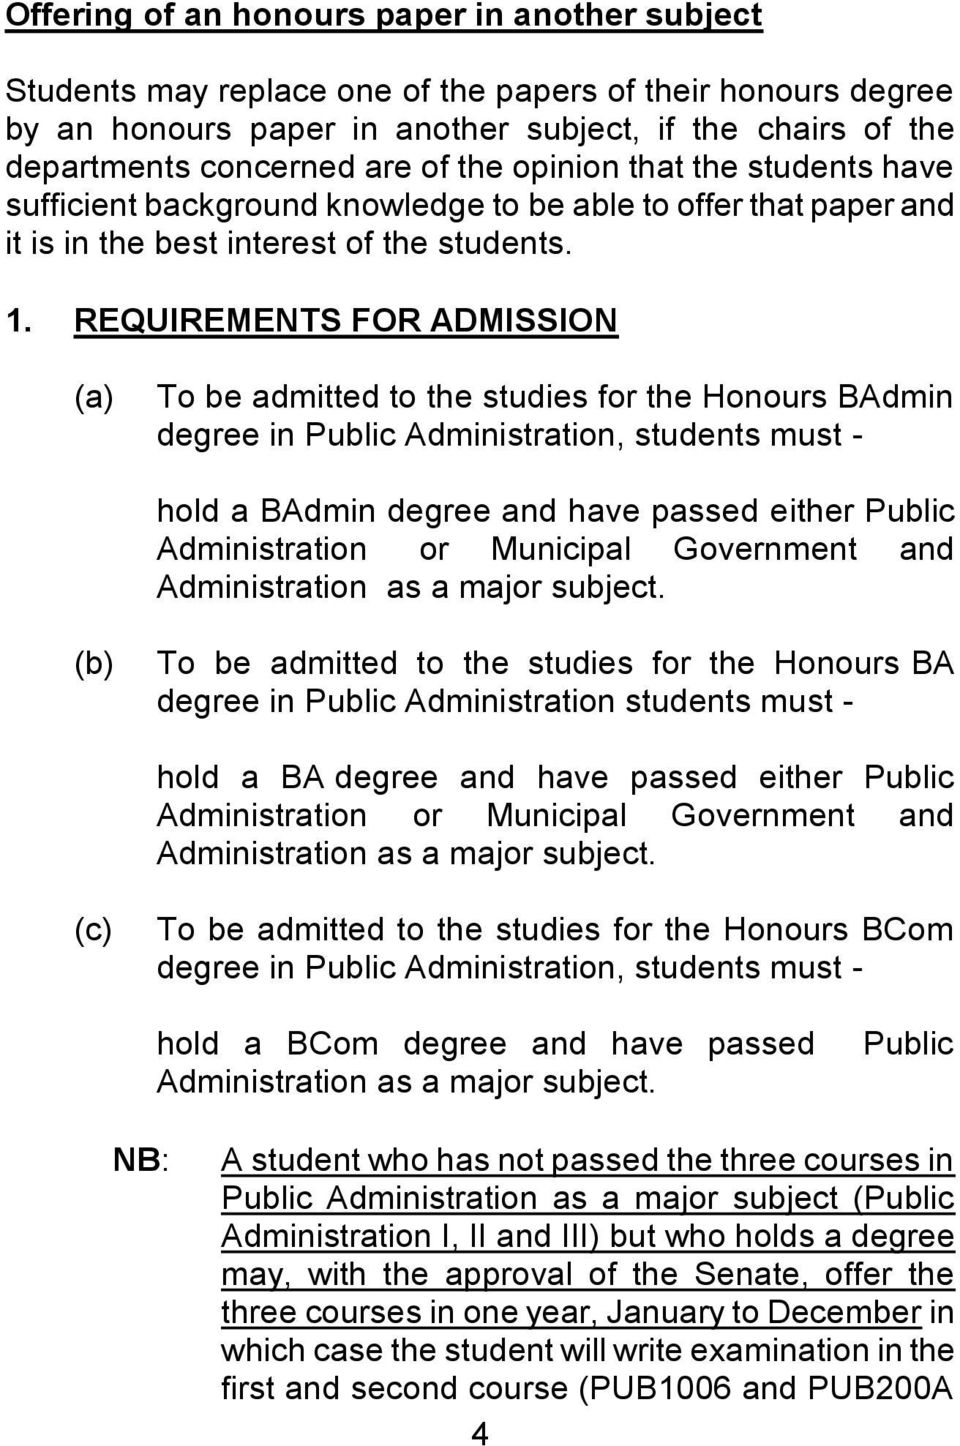 REQUIREMENTS FOR ADMISSION (a) To be admitted to the studies for the Honours BAdmin degree in Public Administration, students must - hold a BAdmin degree and have passed either Public Administration